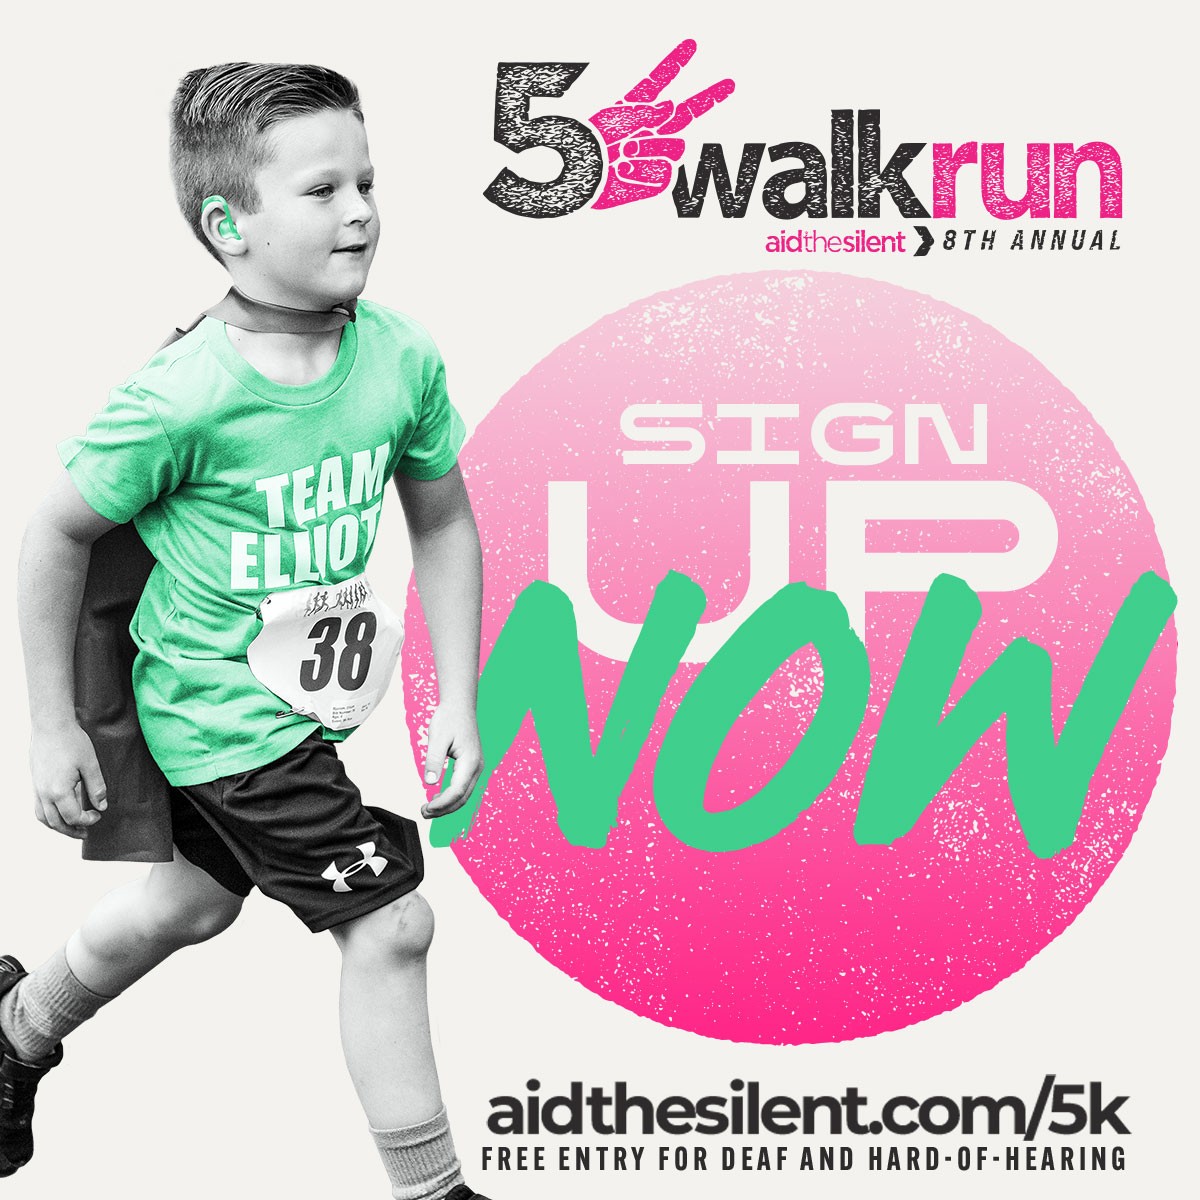 Aid the Silent 5k Register NOW